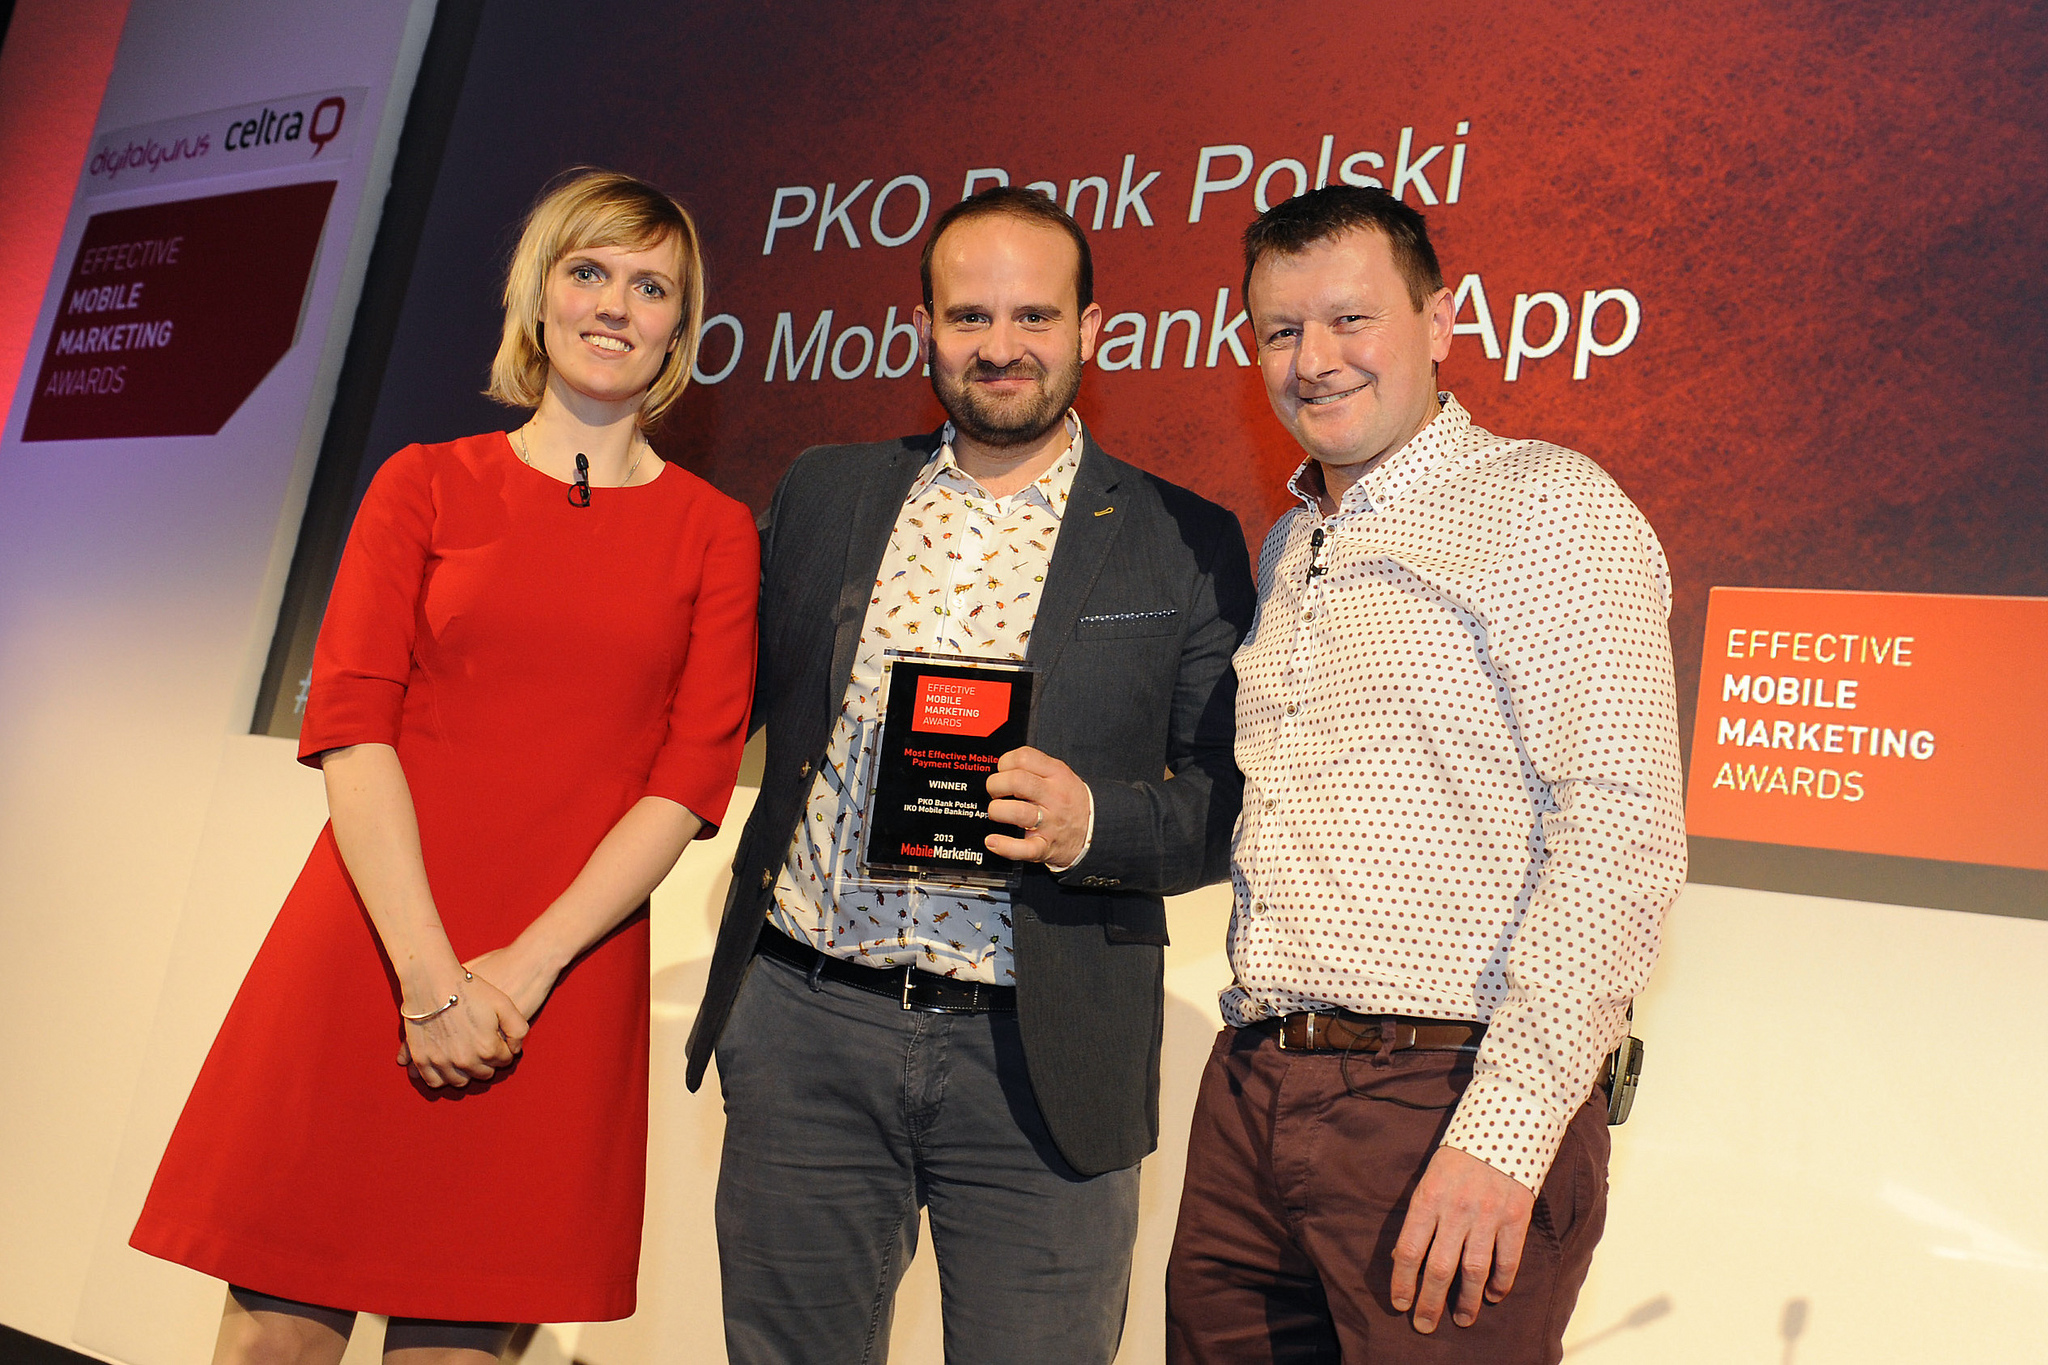 Effective Mobile Marketing Awards – Last Year's Winners: Payment Solution